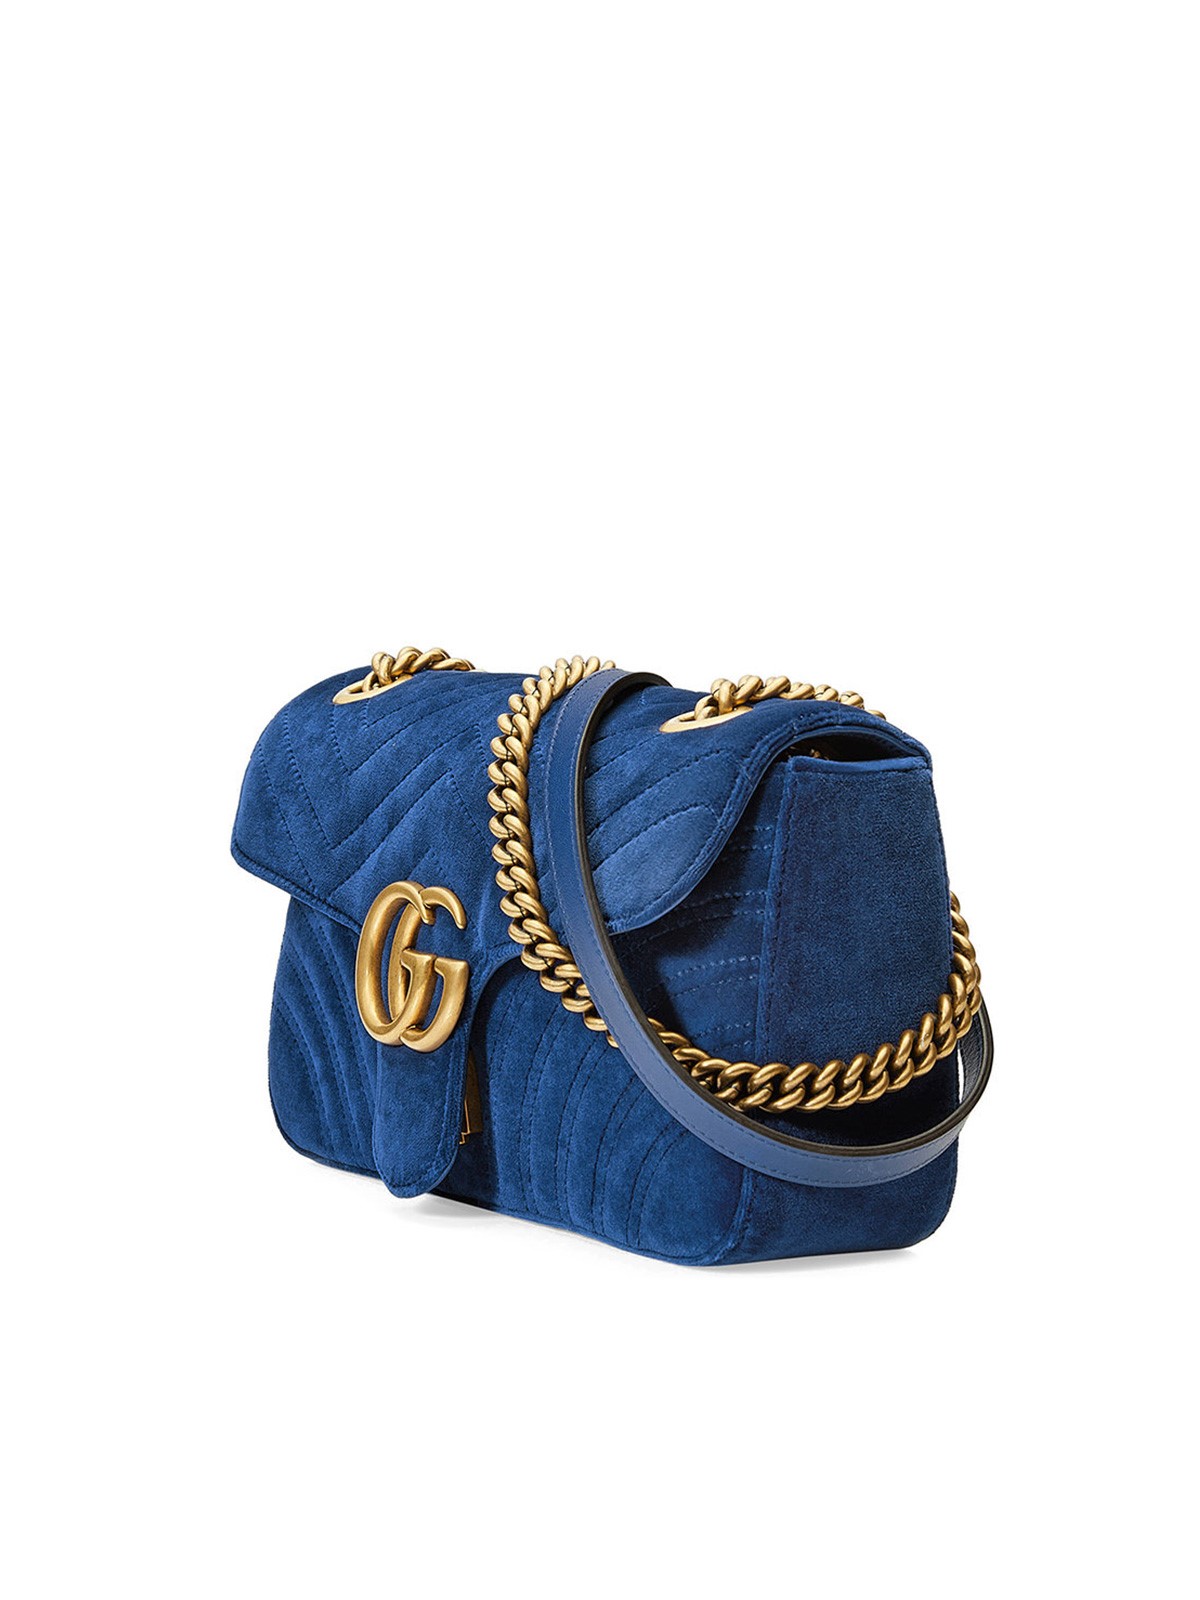 gucci GG MARMONT SHOULDER BAG available on mediakits.theygsgroup.com - 23196